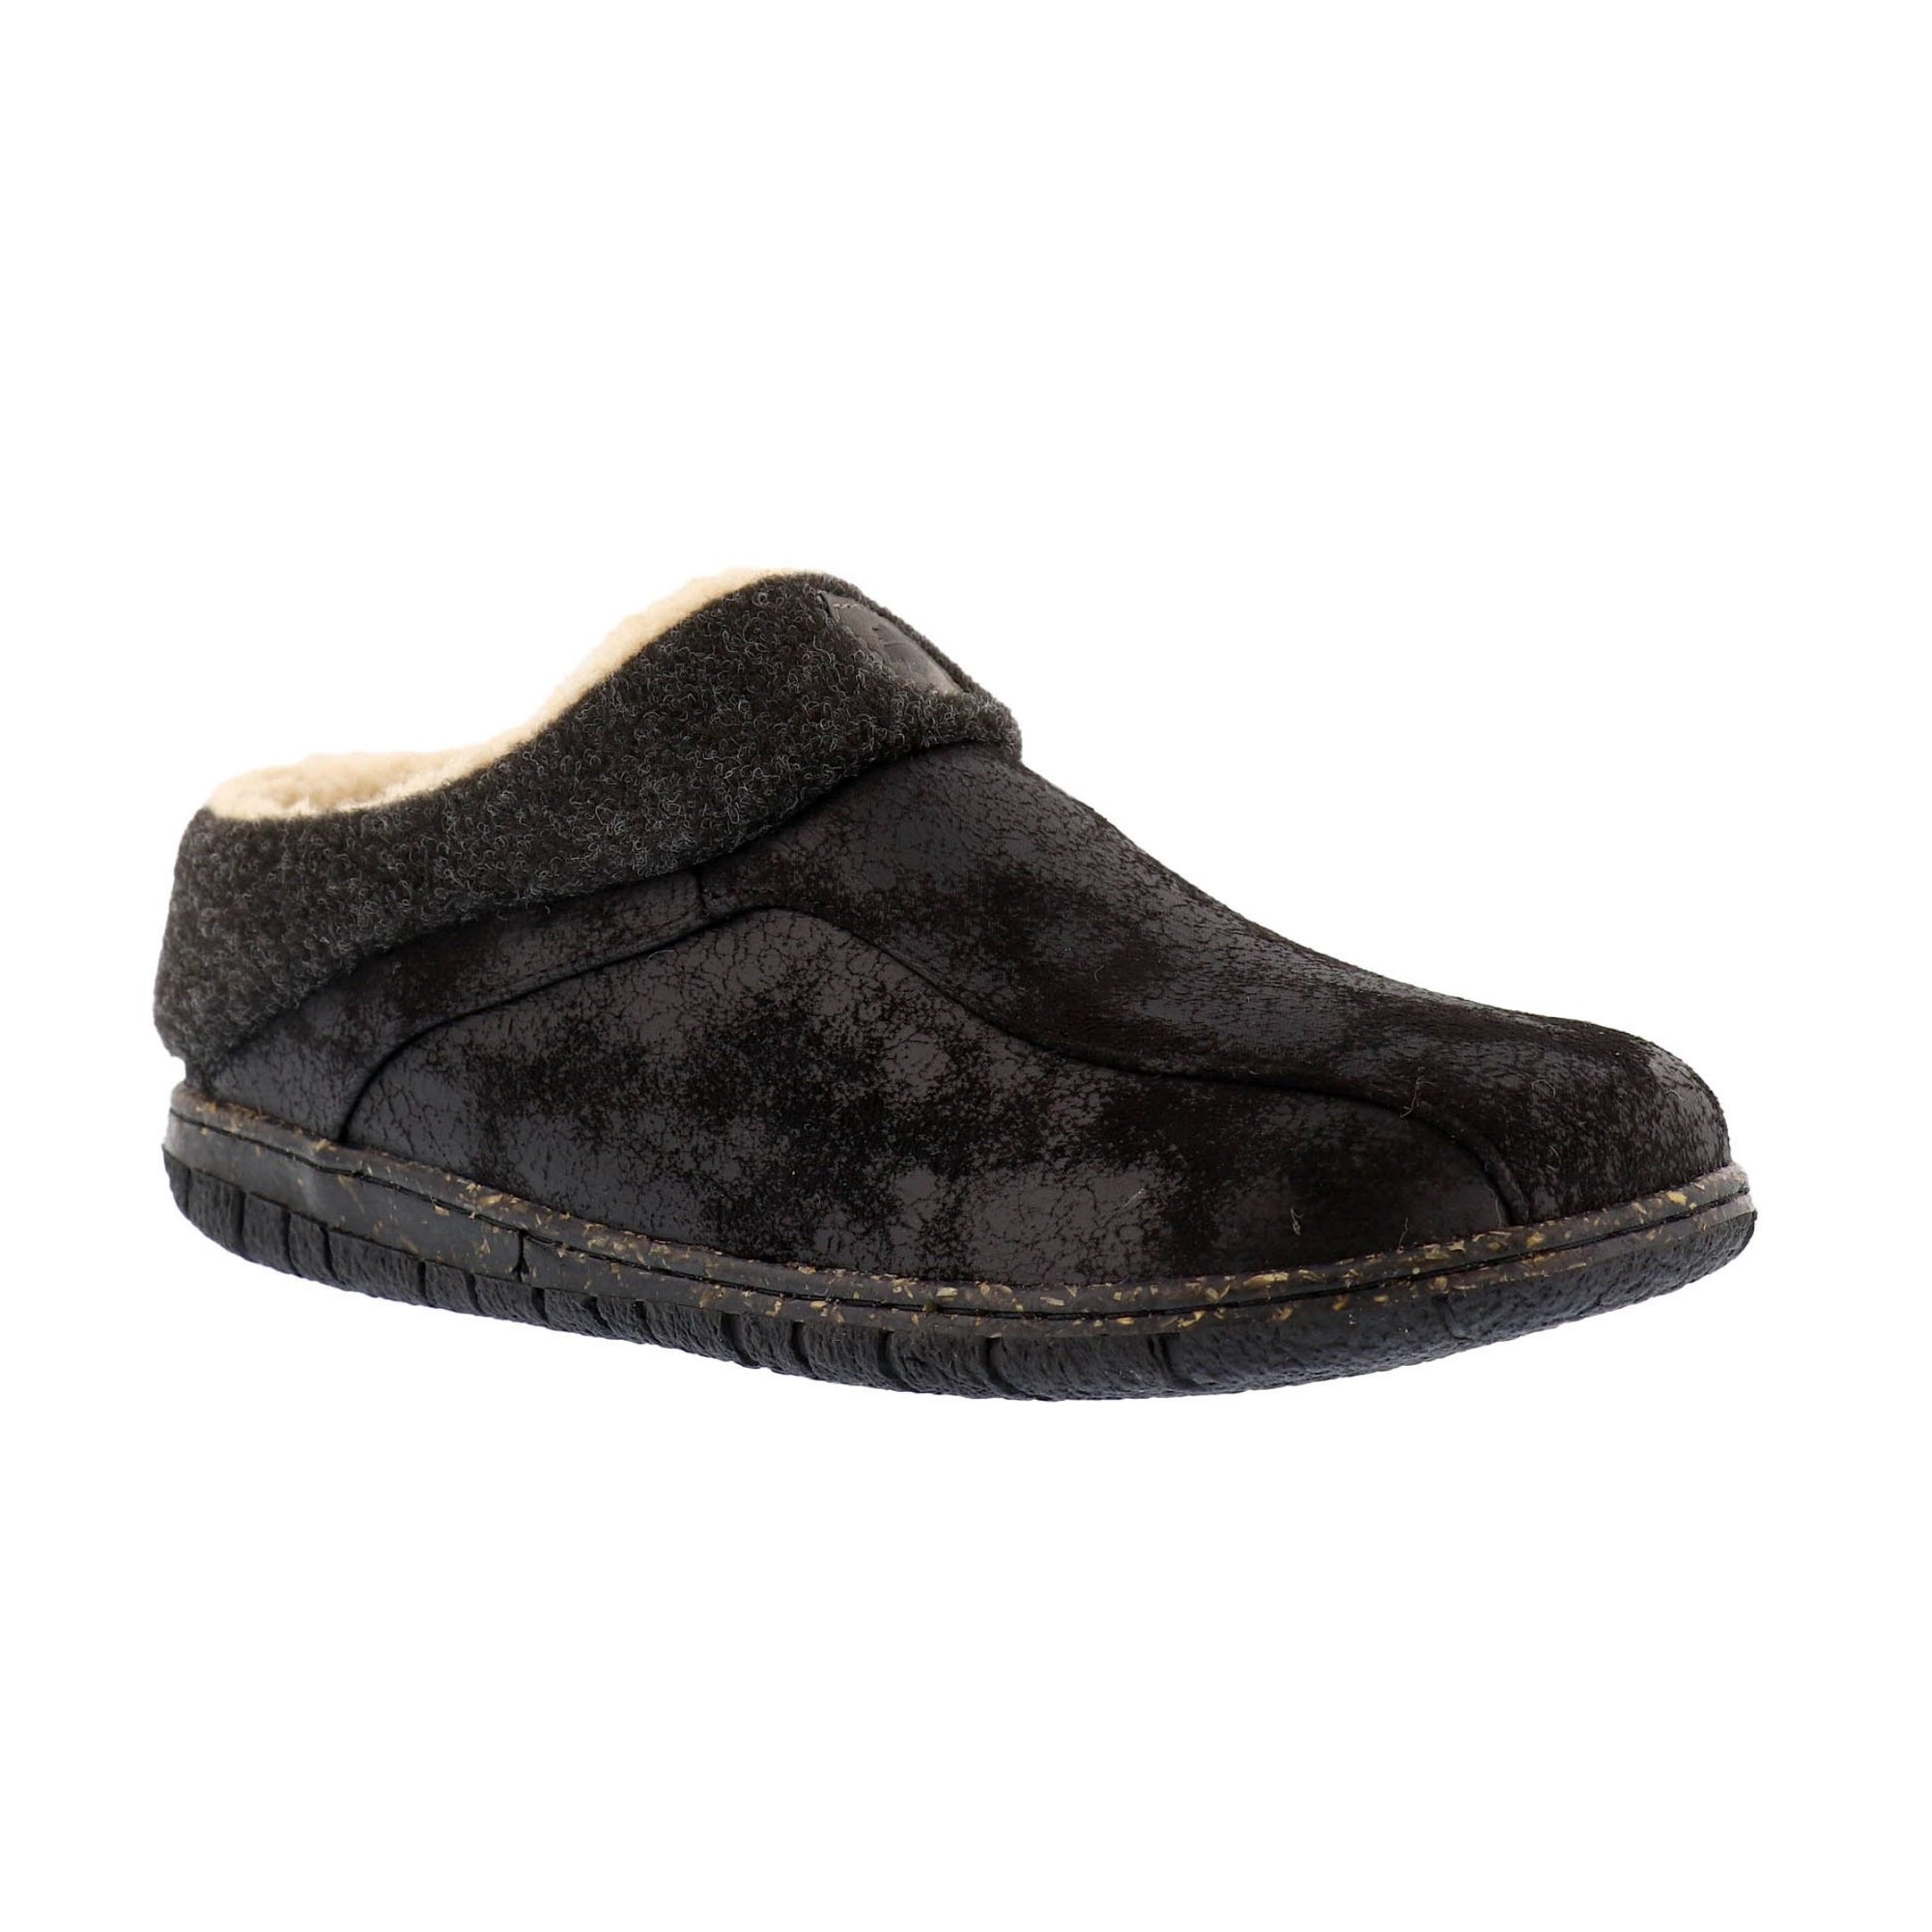 Lucas 2 Slipper in black. A distressed black faux leather upper with a textile collar and a black rubber outsole. 